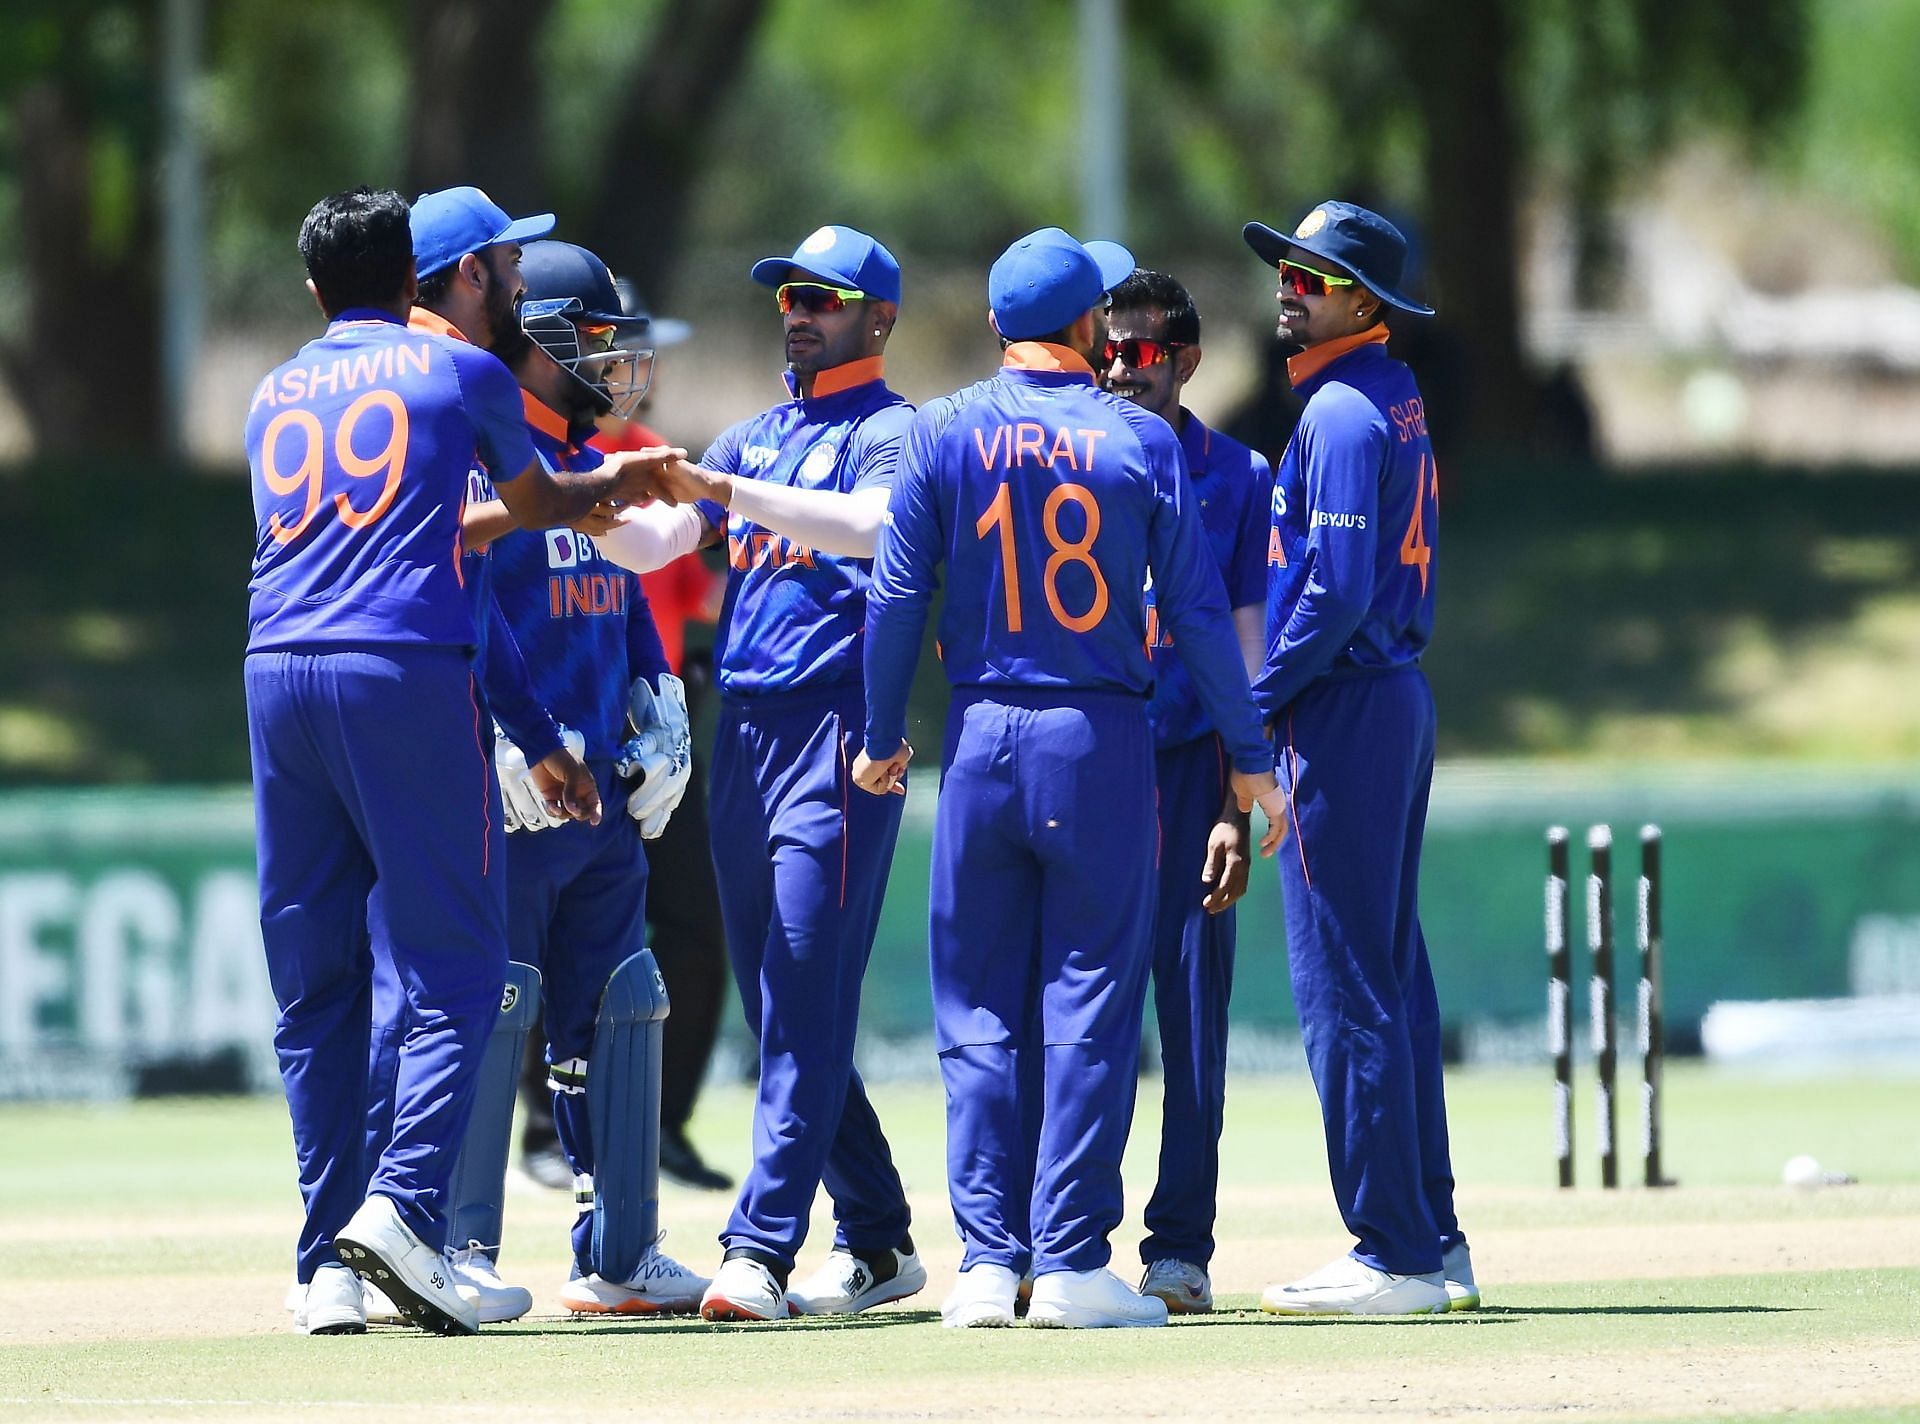 The visitors celebrate a wicket during the Paarl ODI. Pic: Getty Images